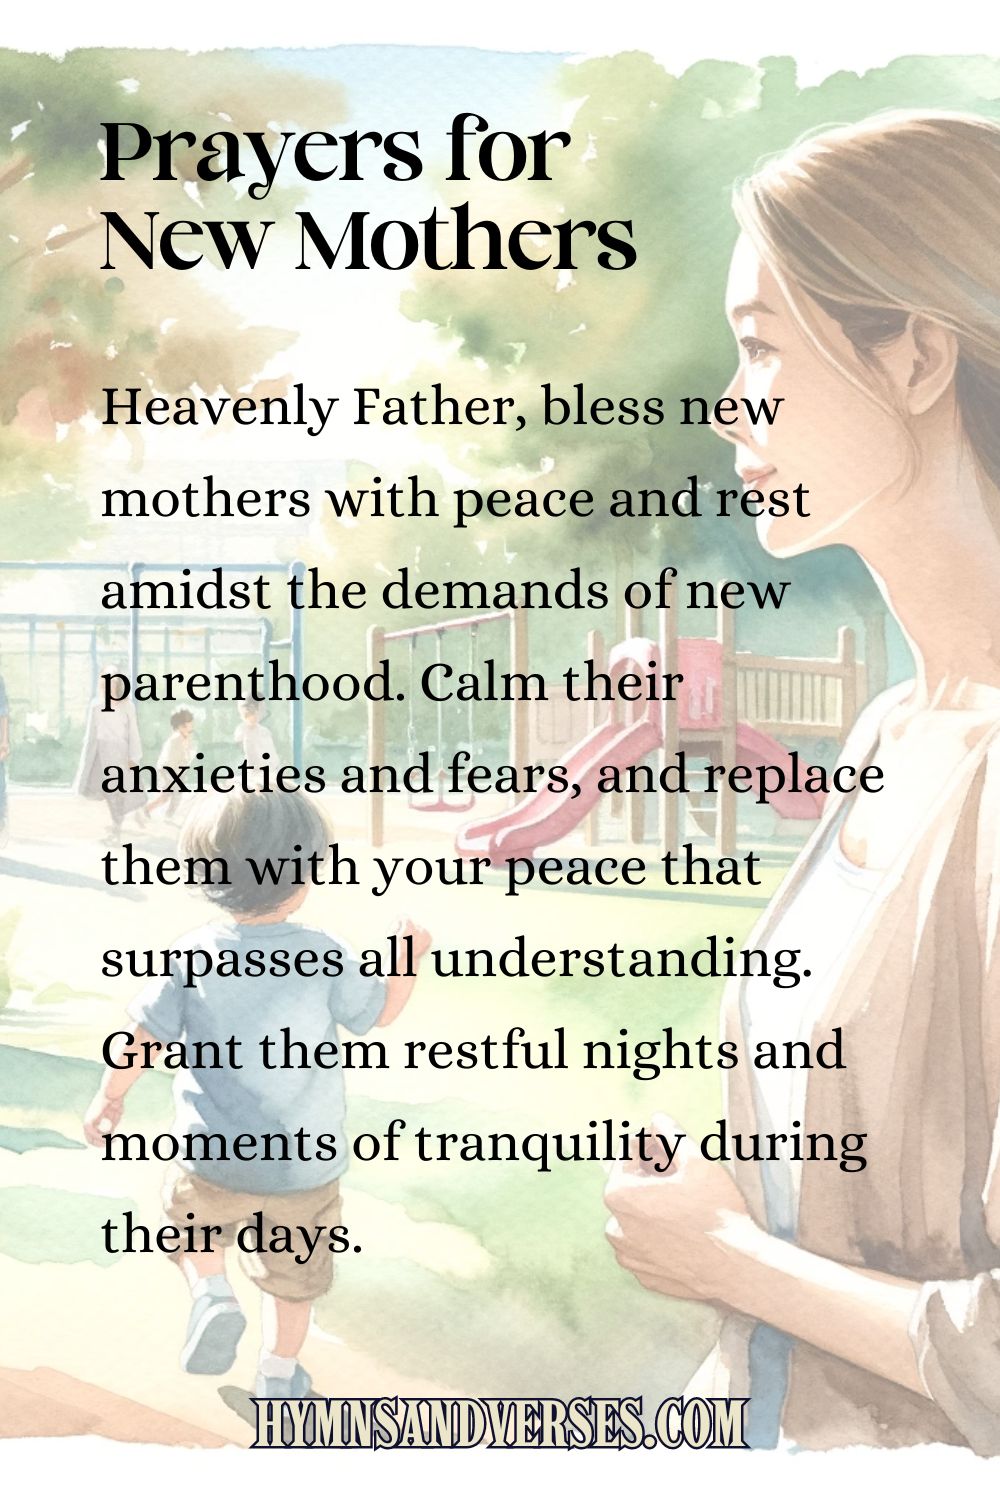 Pin image for Prayers for New Mothers, reads: Heavenly Father, bless new mothers with peace and rest amidst the demands of new parenthood. Calm their anxieties and fears, and replace them with your peace that surpasses all understanding. Grant them restful nights and moments of tranquility during their days. 